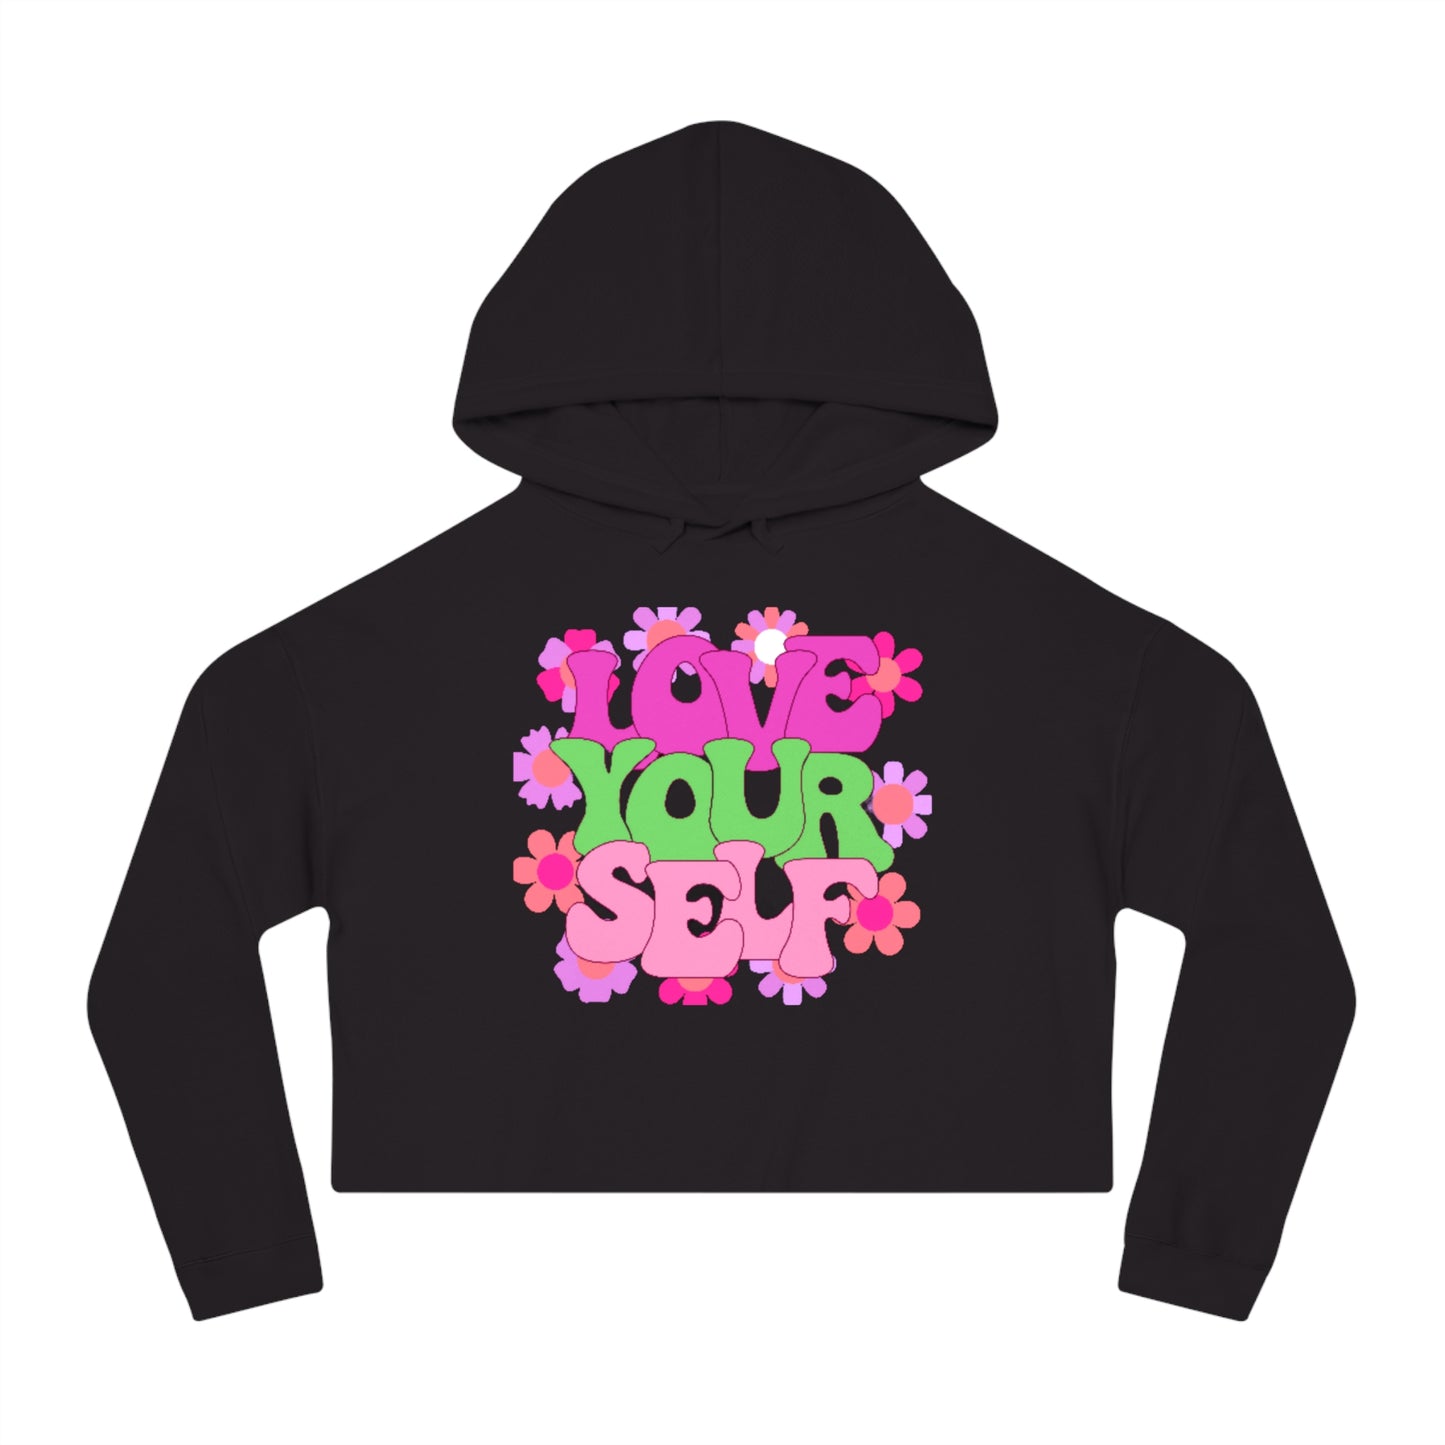 Bright and colorful “LOVE YOURSELF” Women’s Cropped Hooded Sweatshirt for your enjoyment.